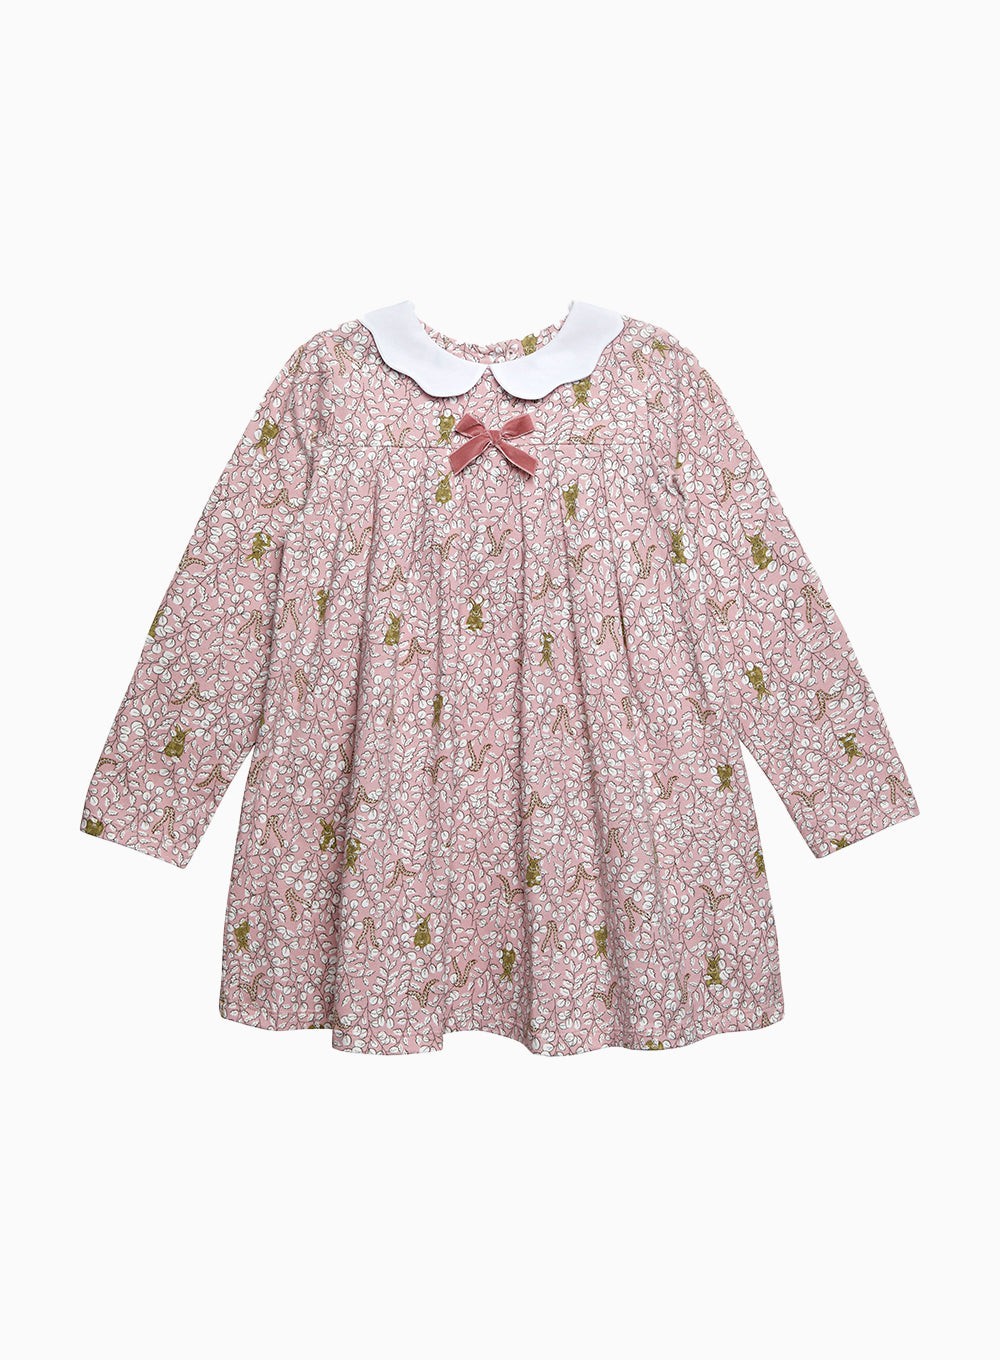 Confiture Dress Woodland Bunny Jersey Dress in Rose